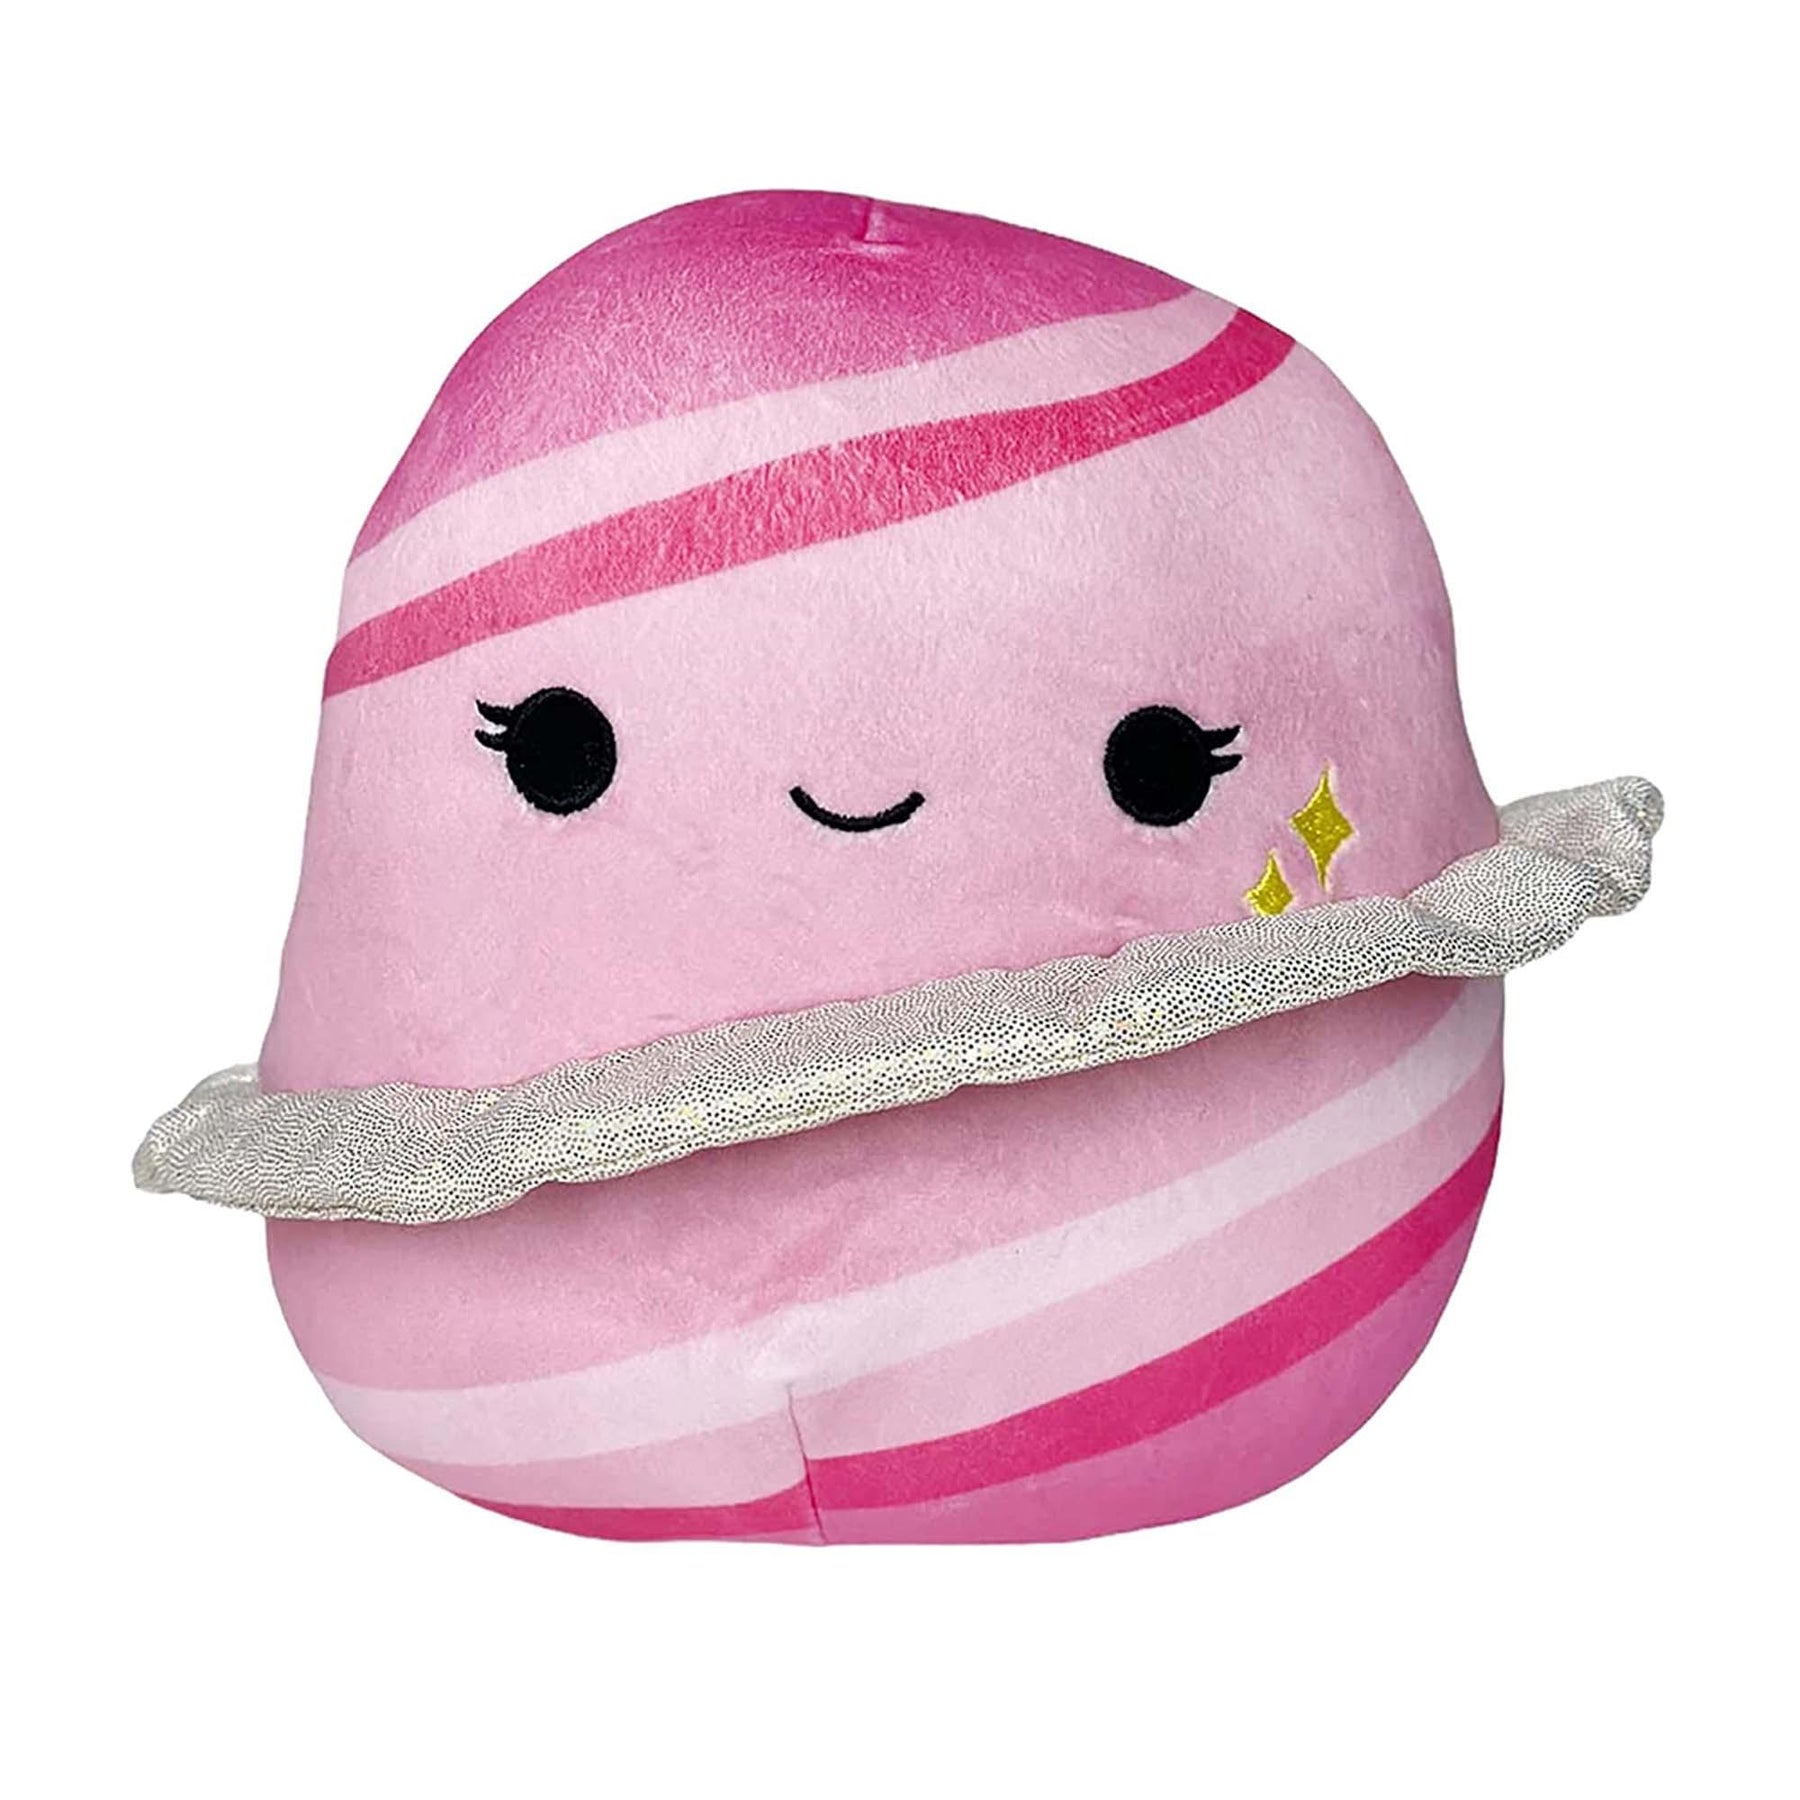 Squishmallow 8 Inch Plush Space | Zuzana the Pink Planet